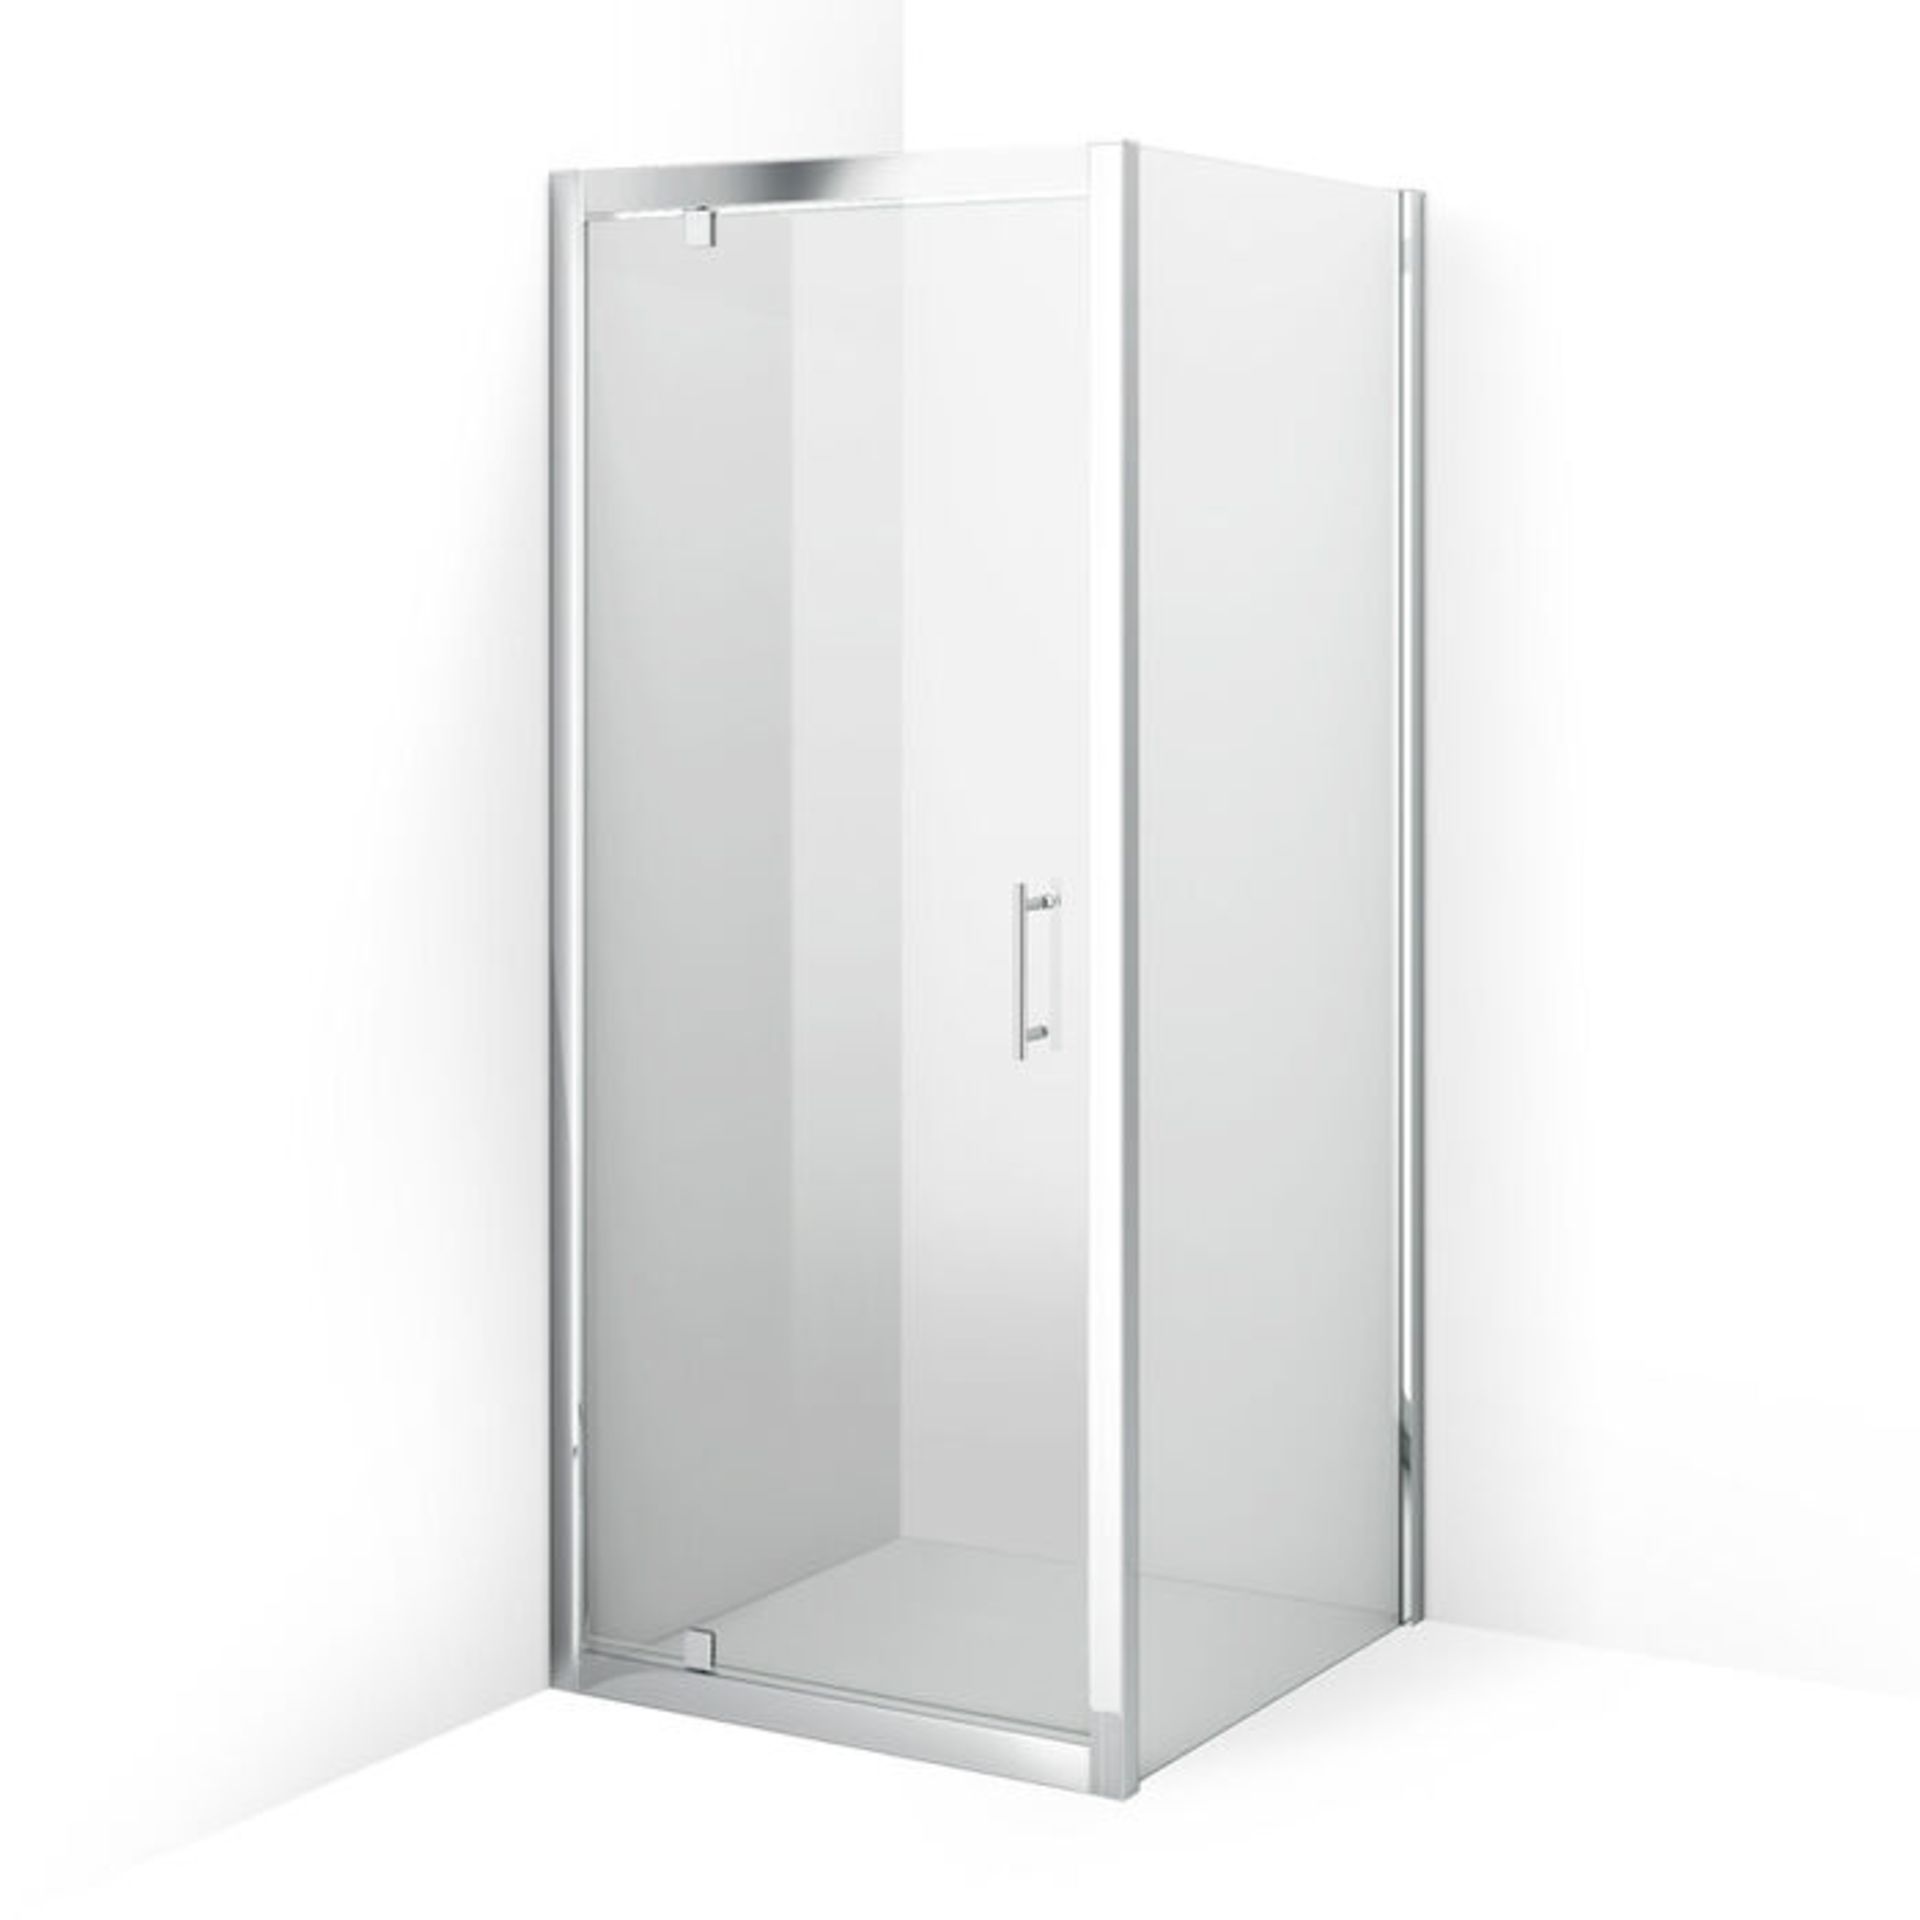 (Z101) 760x760mm - 6mm - Elements Pivot Door Shower Enclosure. RRP £309.99. 6mm Safety Glass ... - Image 4 of 4